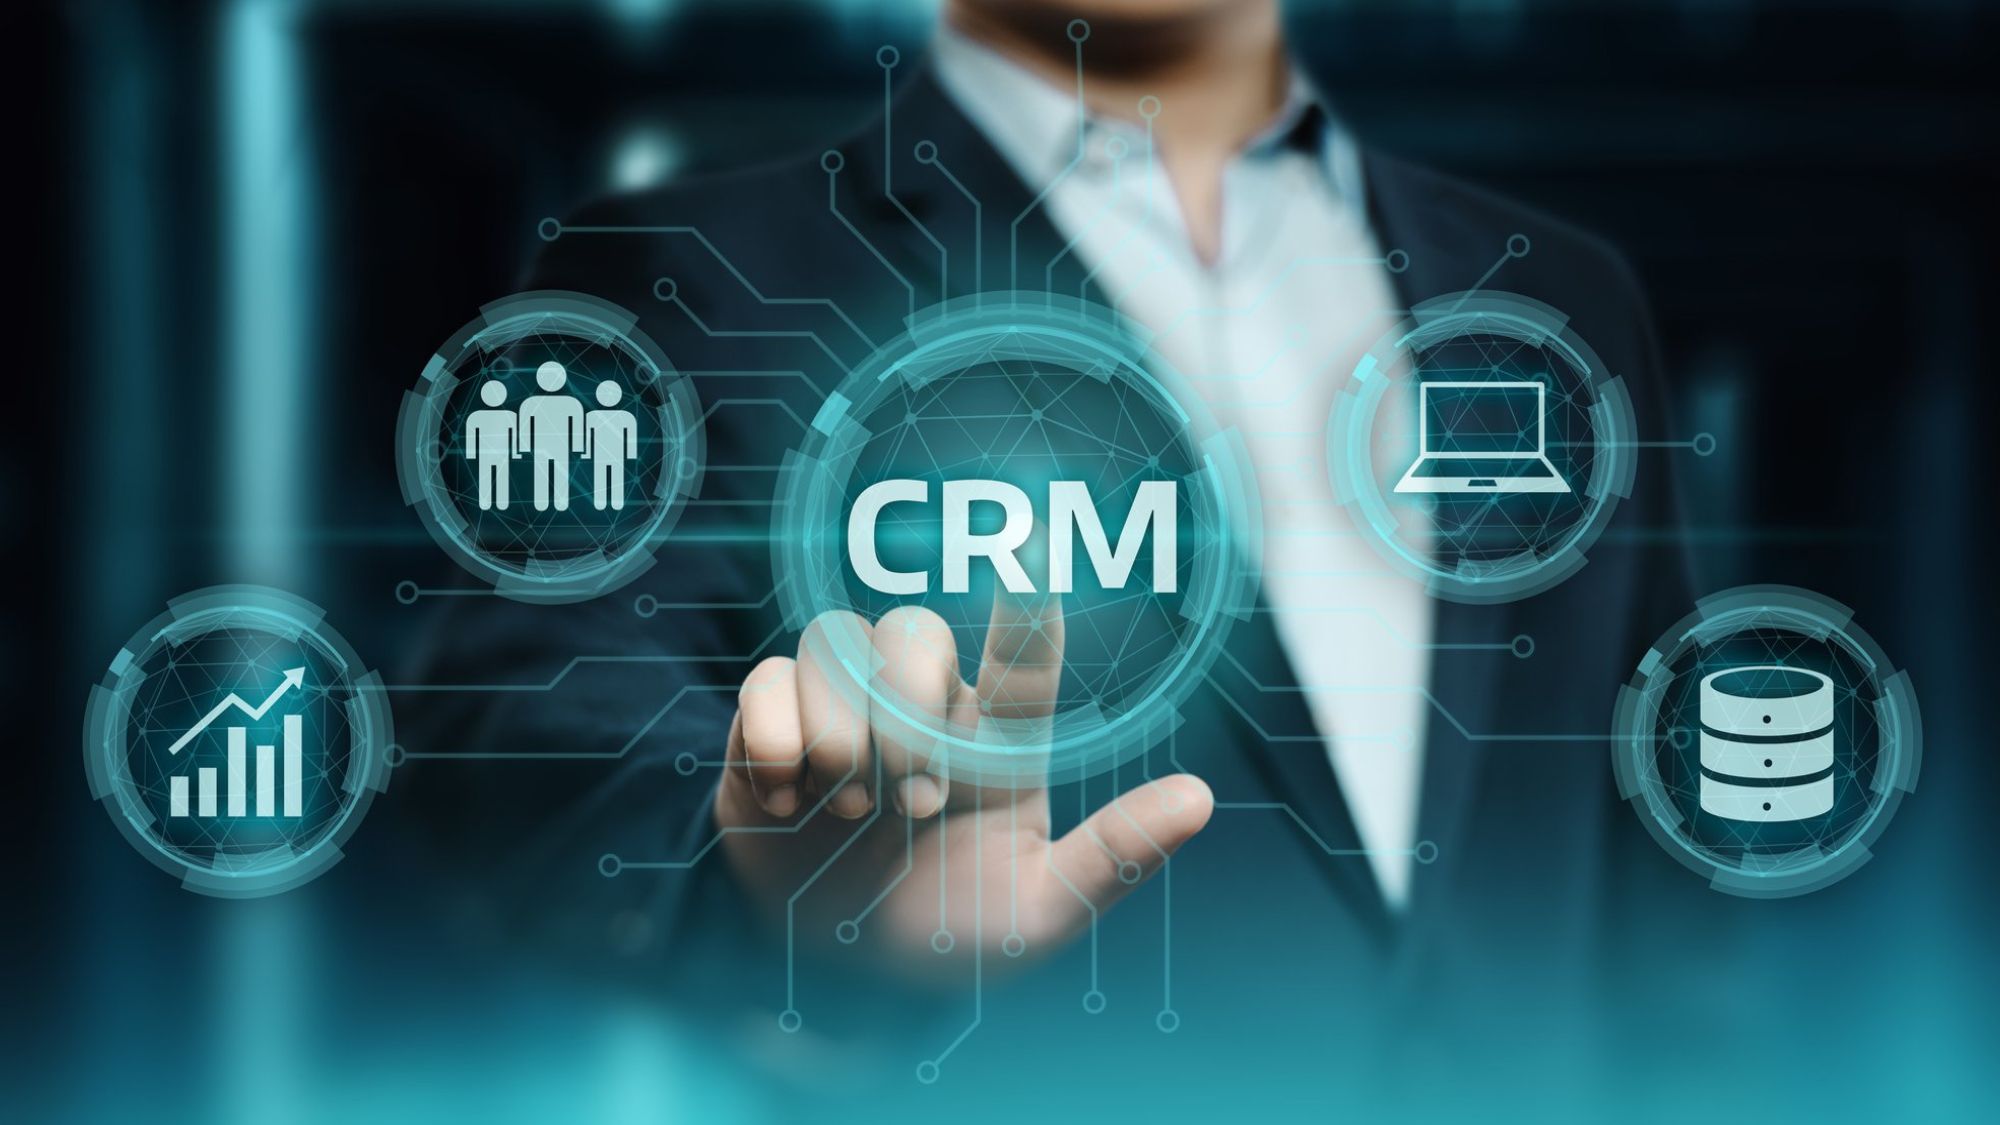 A businessman digitially representing the importance of CRM solutions